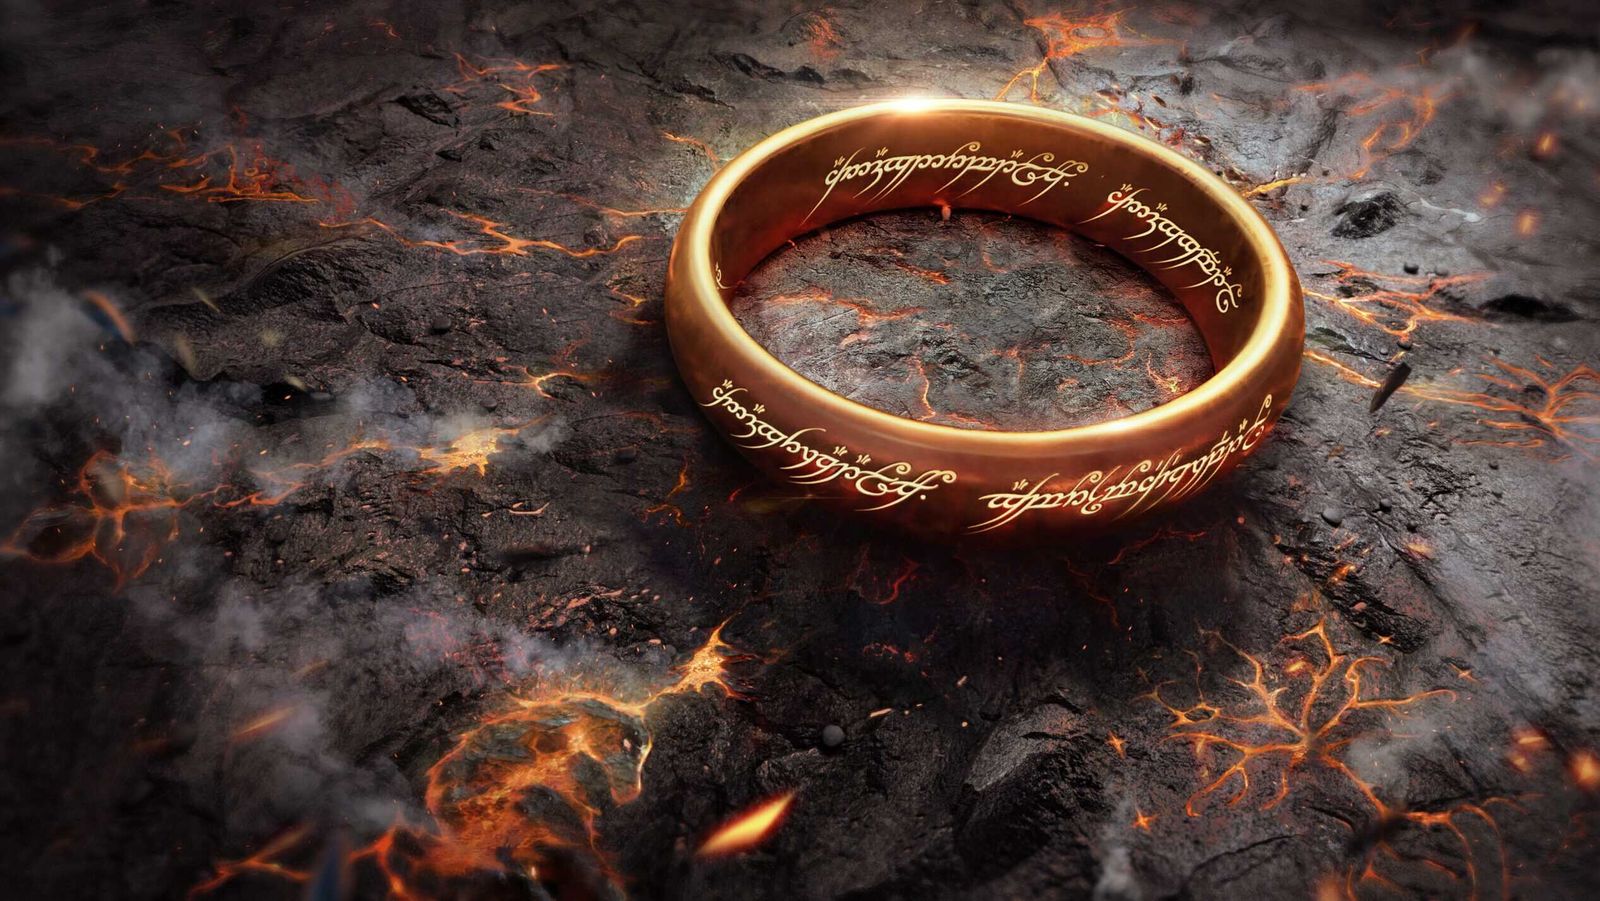 The Lord of The Rings: The Rings of Power Early reactions are out and here is what critics are saying about Amazon Studio's upcoming series